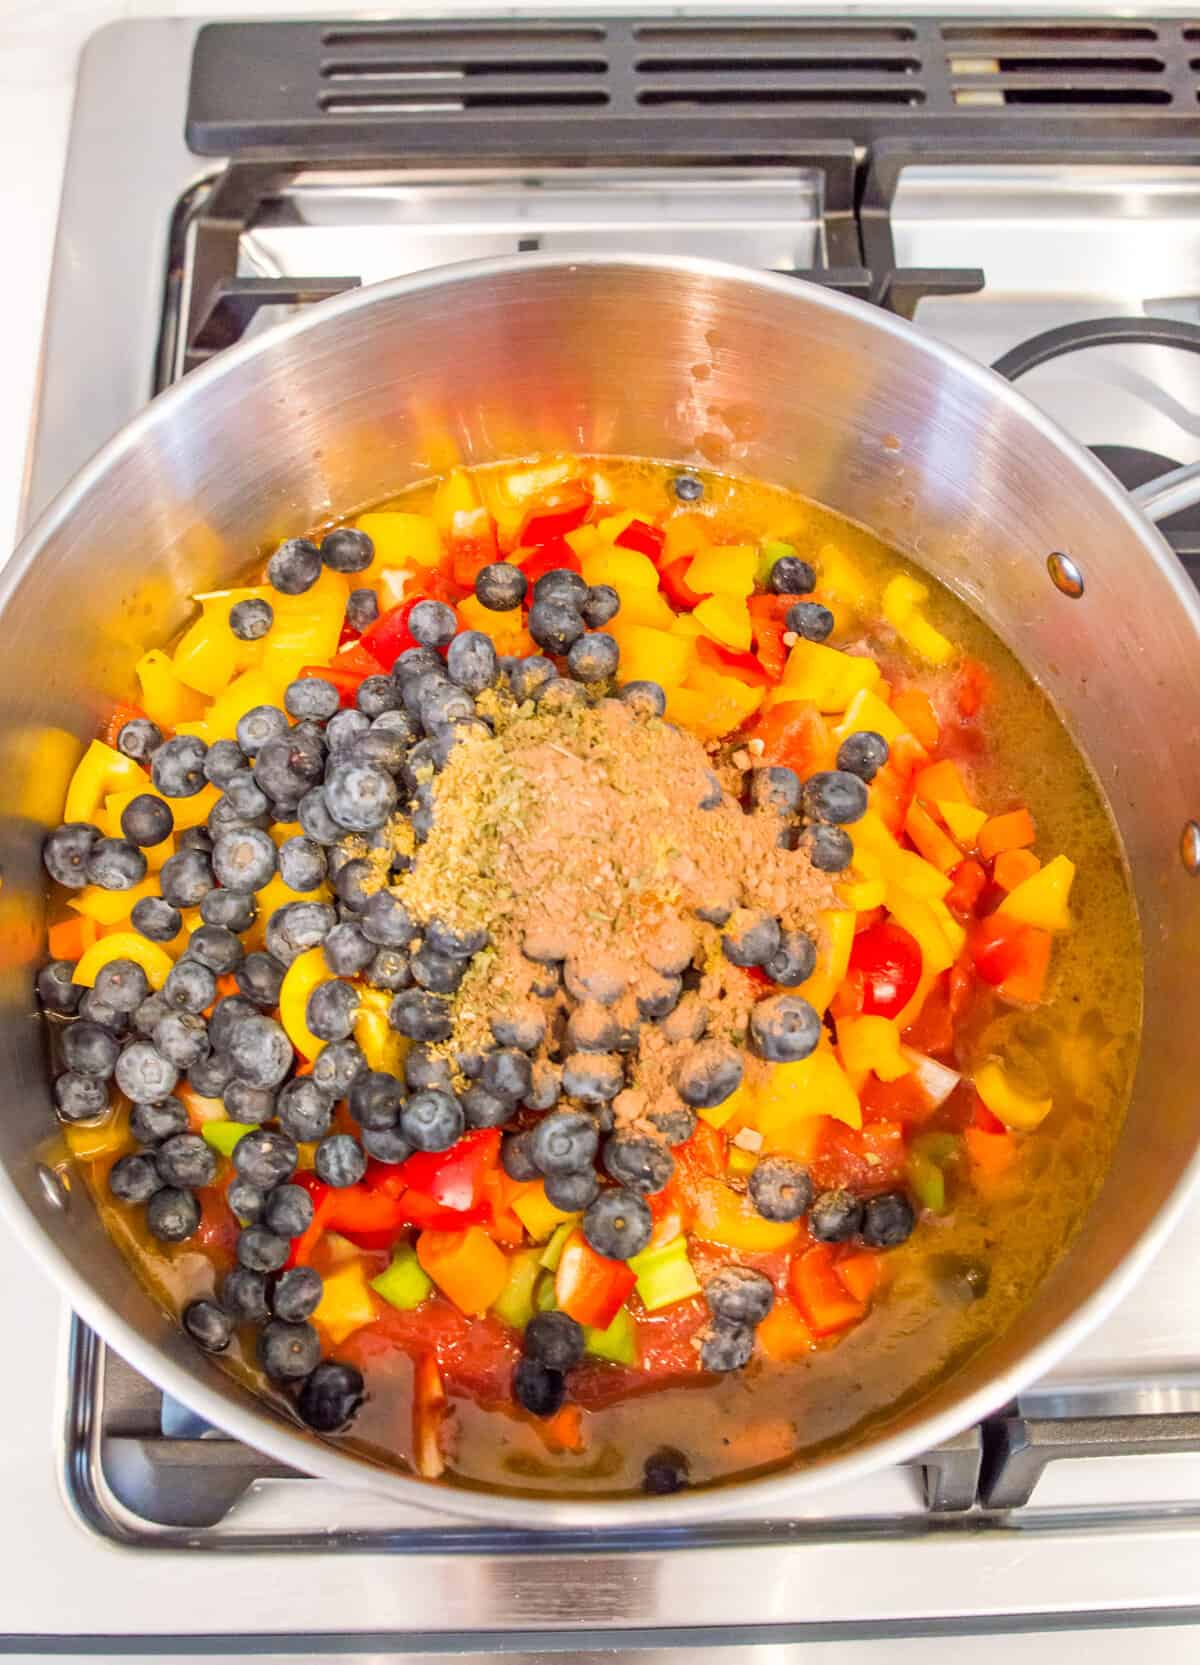 A pot filled with chopped vegetables, cooked ground beef, blueberries, spices and broth.